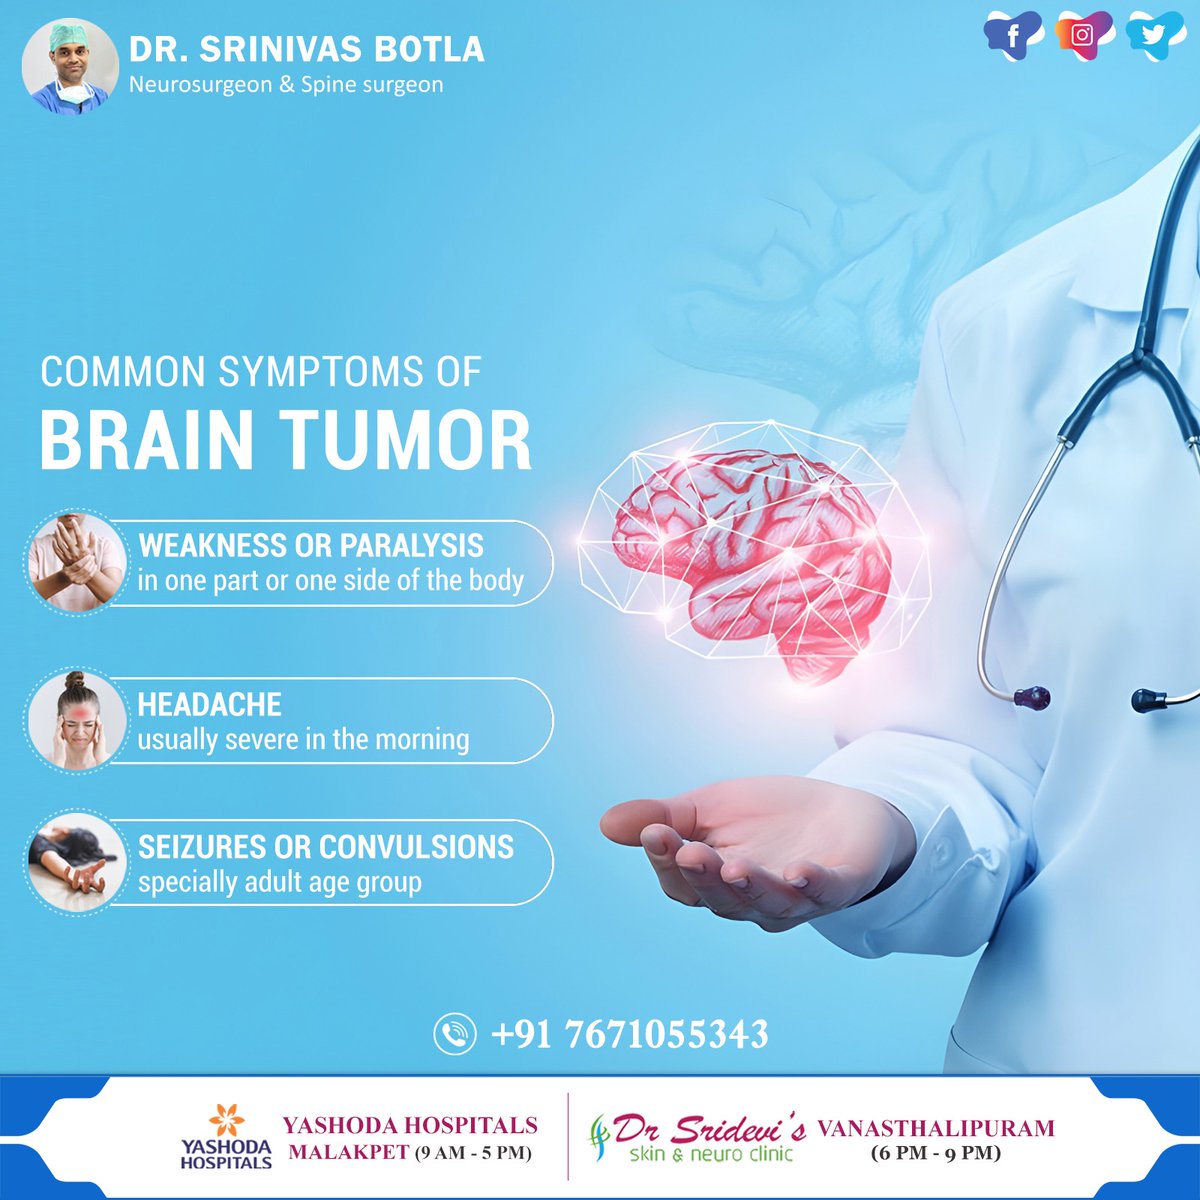 'Know the #signs: persistent #headaches, #visionchanges, #seizures, #memoryloss. Early detection saves lives. Be aware. Stay healthy.'

#Drsrinivasbotla #skin&neuroclinic #neurosurgeon #yashodahospital #malakpet #spinesurgeon #neurosurgery #spinesurgery #surgery #neurology